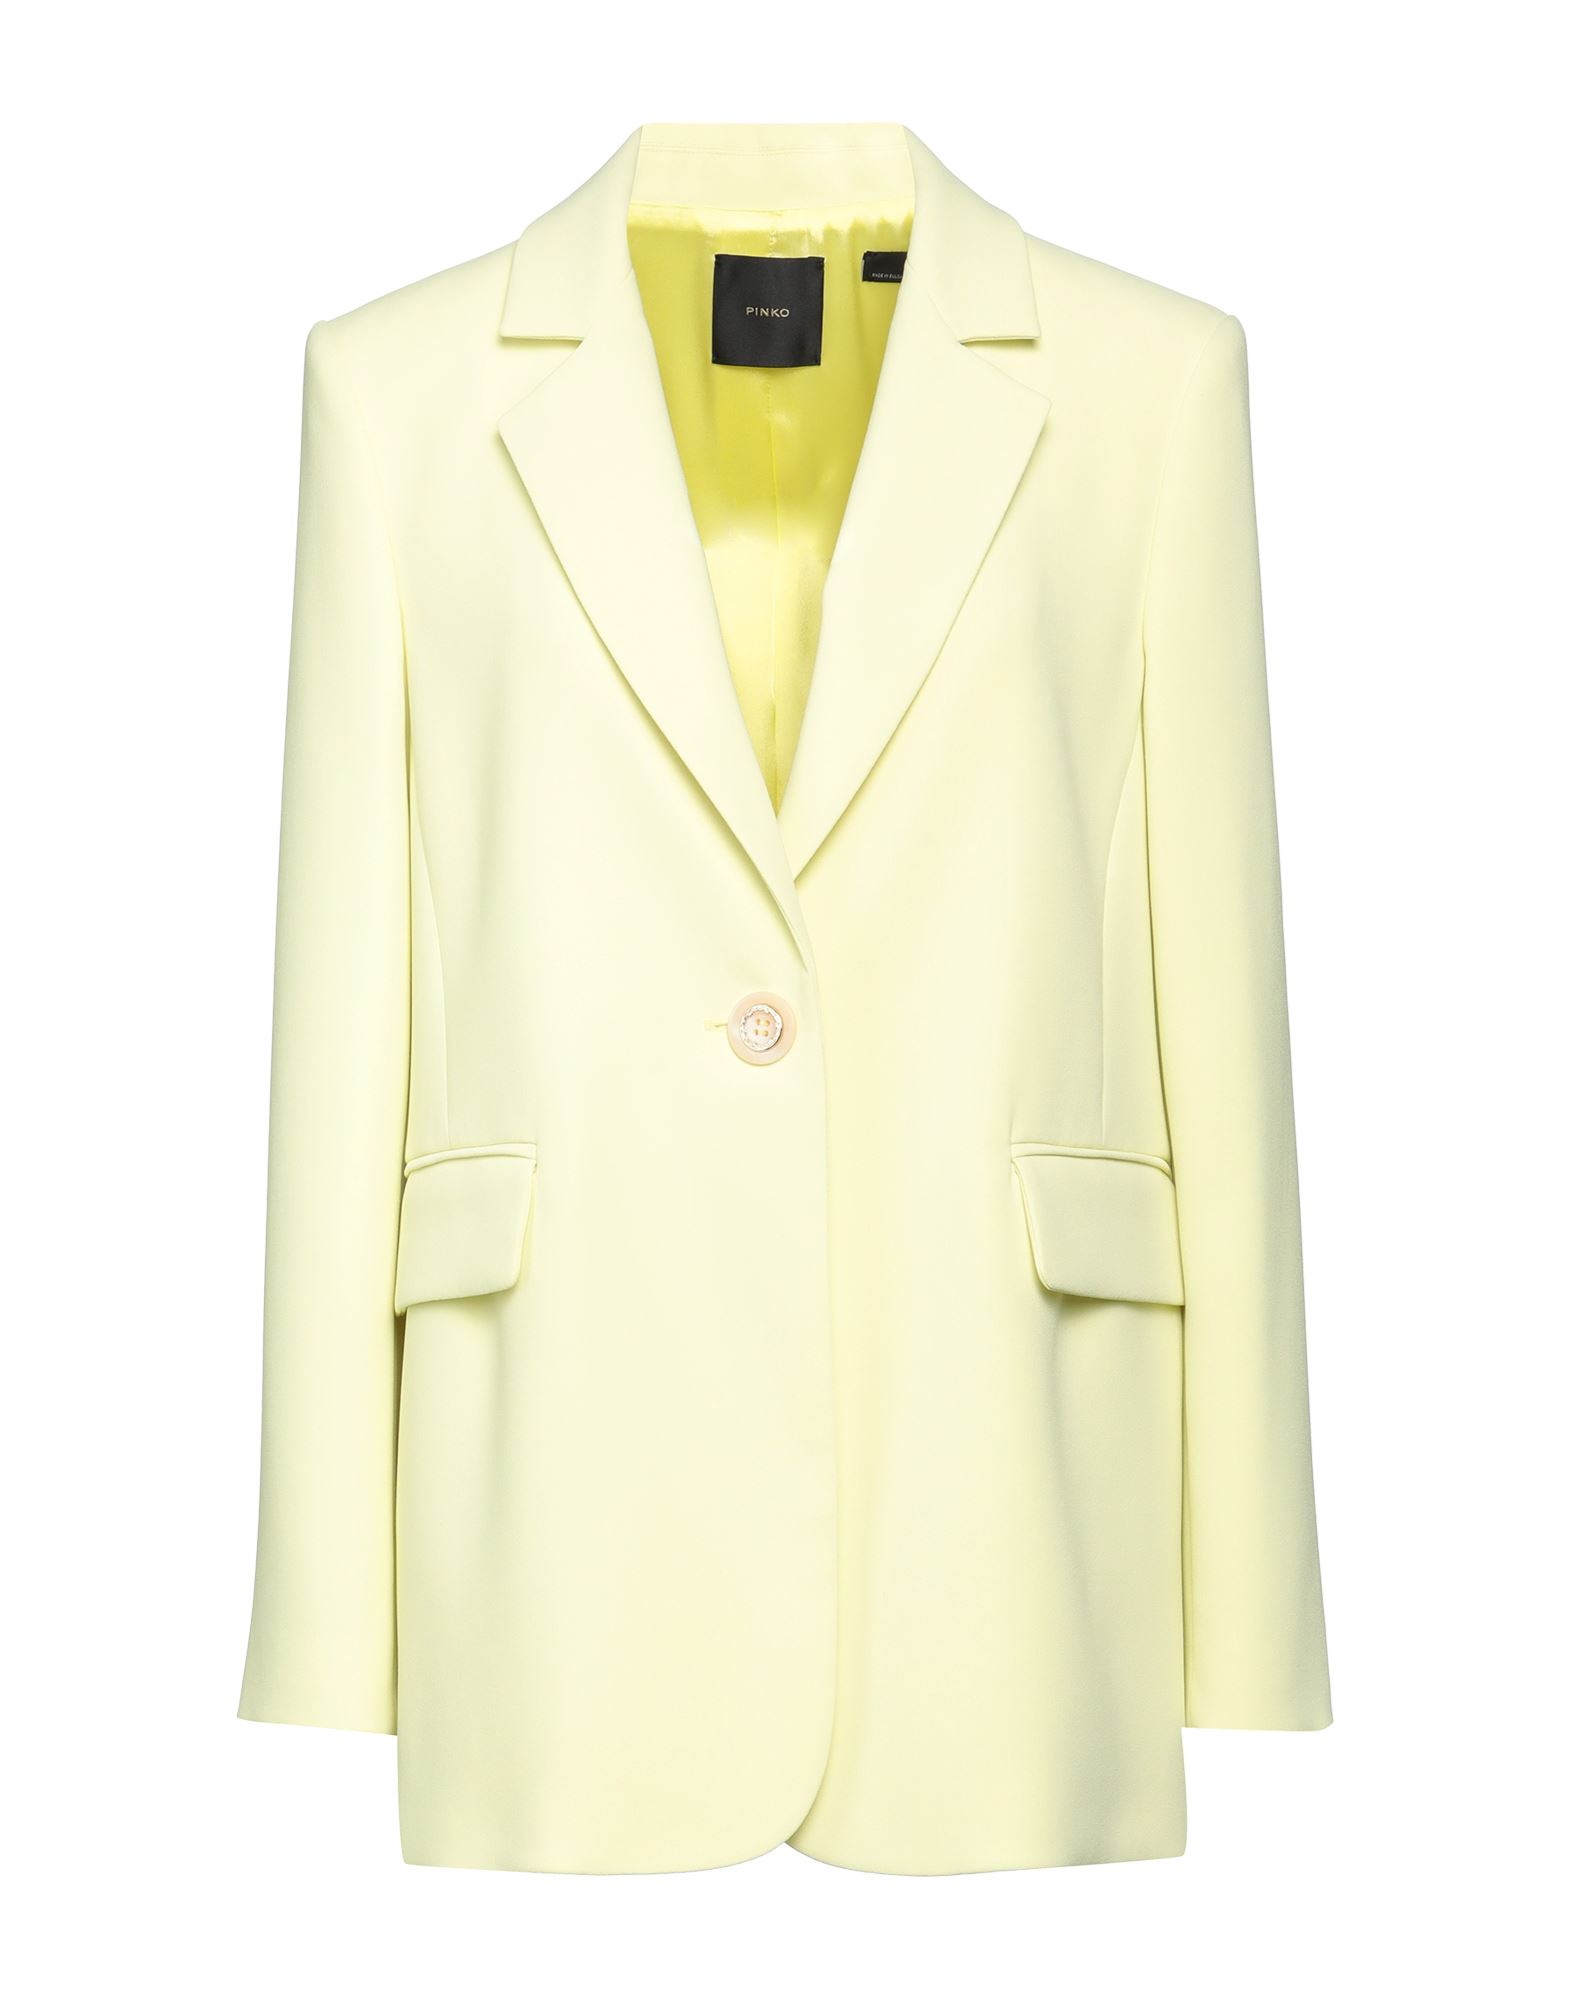 Pinko Suit Jackets In Green